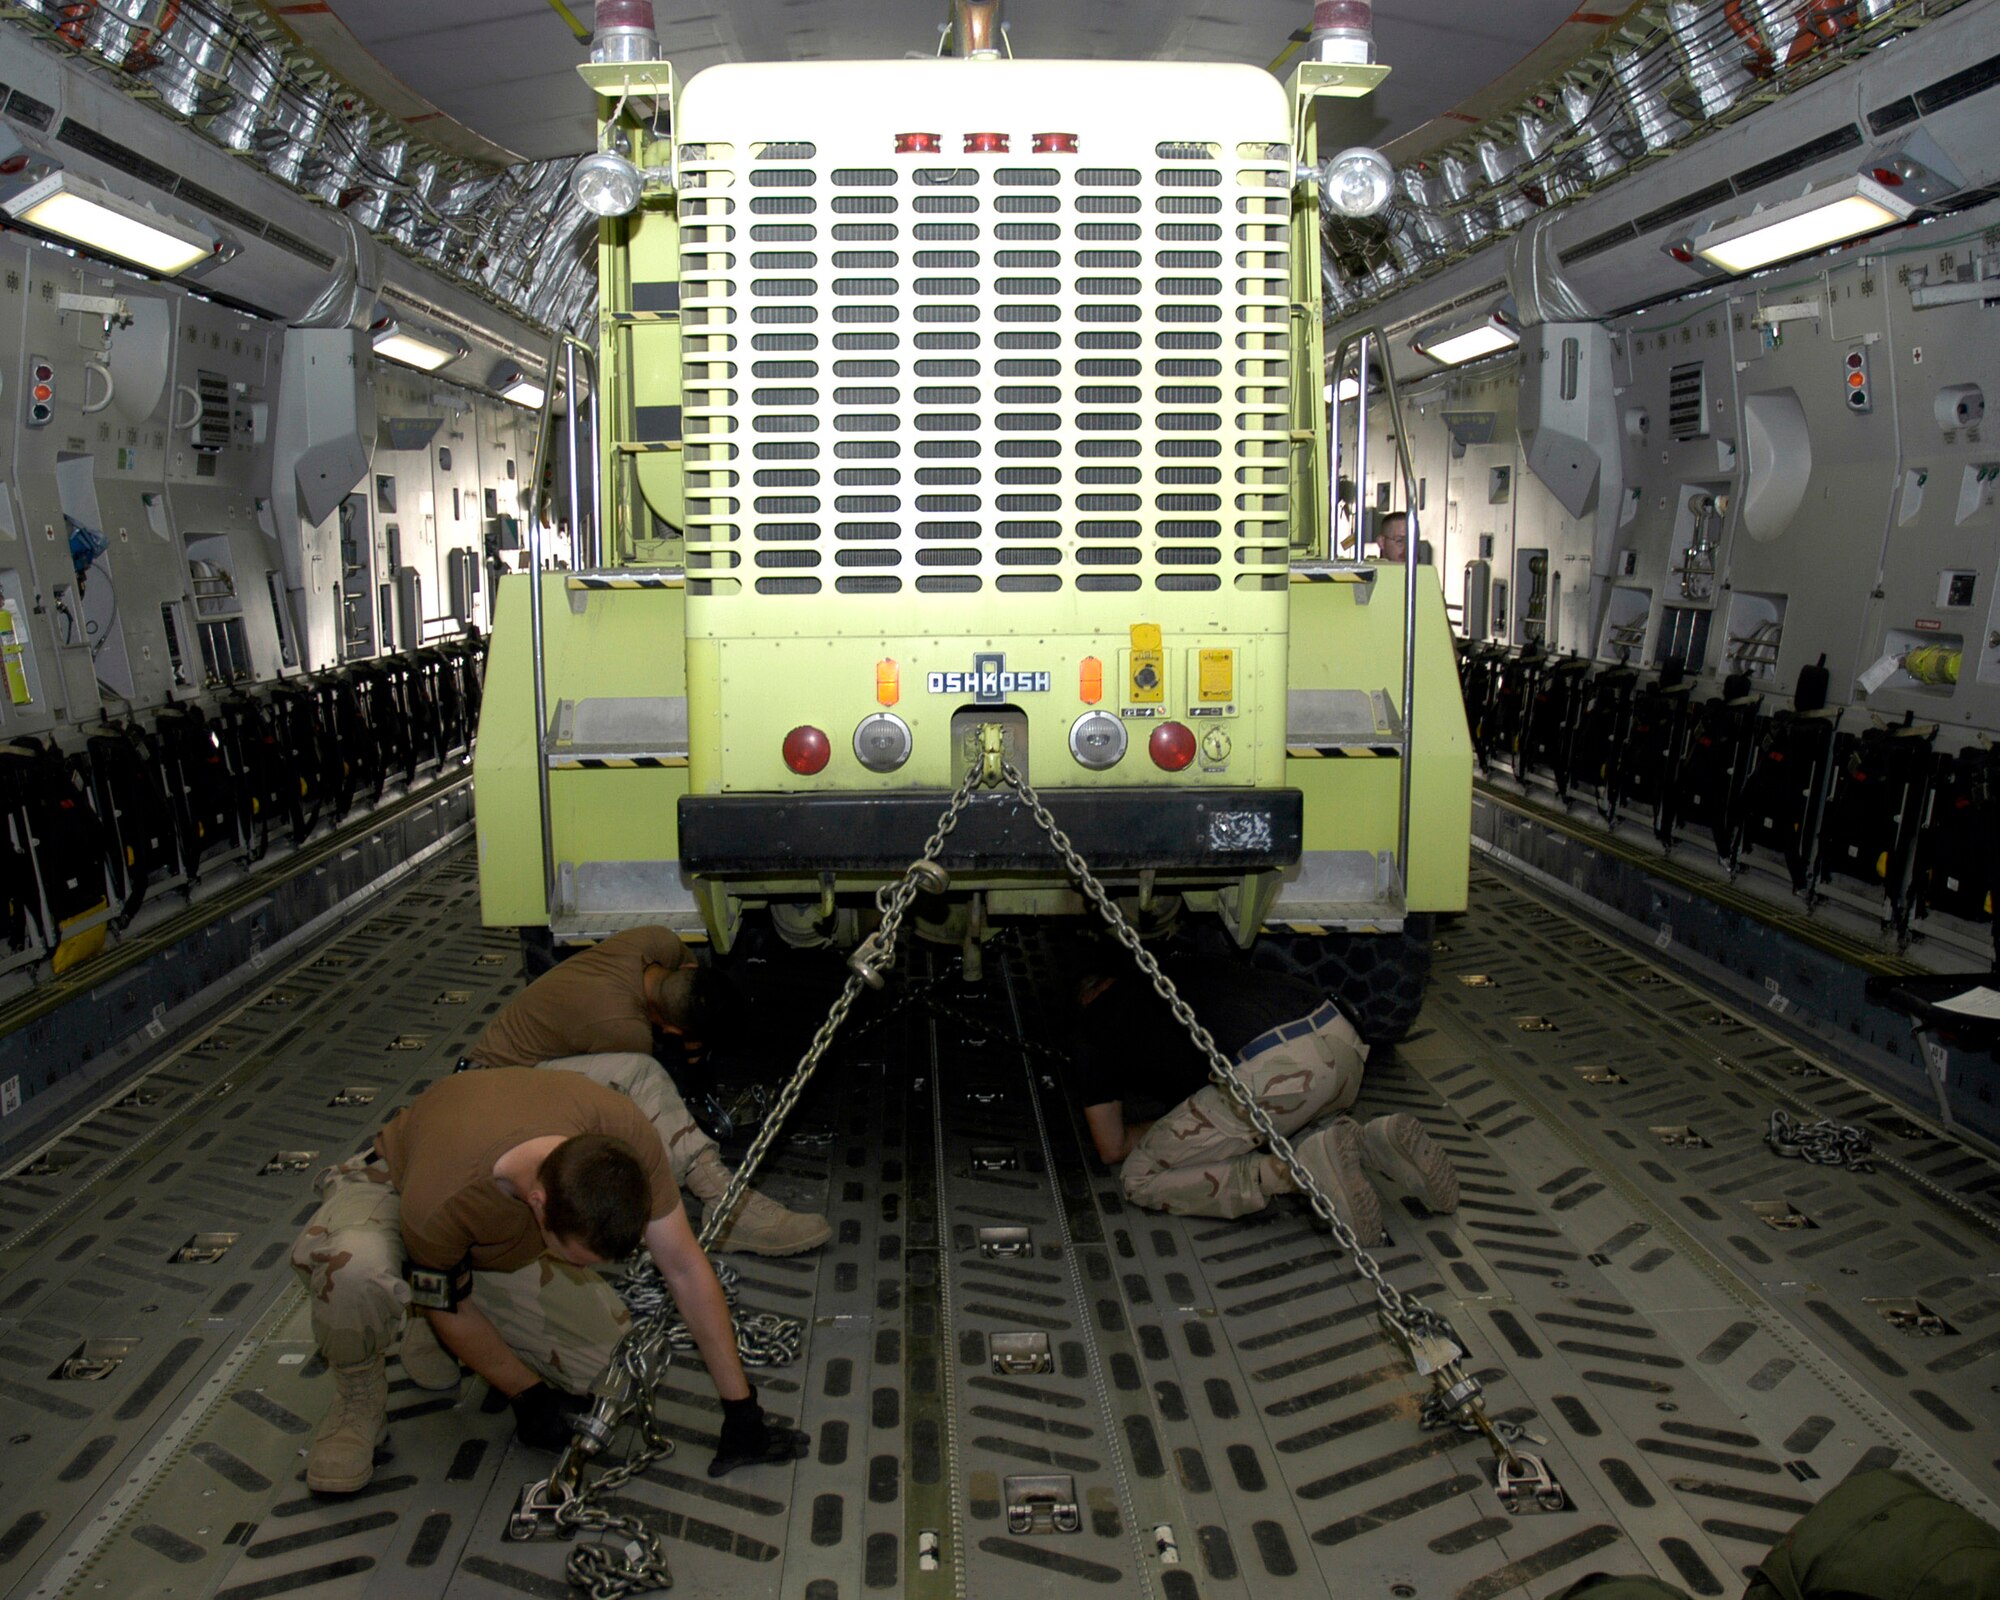 Airmen from the 386th Expeditionary Logistics Readiness Squadron use chains to secure a fire and rescue truck April 19 inside a C-17 Globemaster III in Southwest Asia. The truck is one of two donated by Baltimore officials and bound for Mazar-i-Sharif Airport in Northern Afghanistan. (U.S. Air Force photo/Staff Sgt. Ian Carrier)